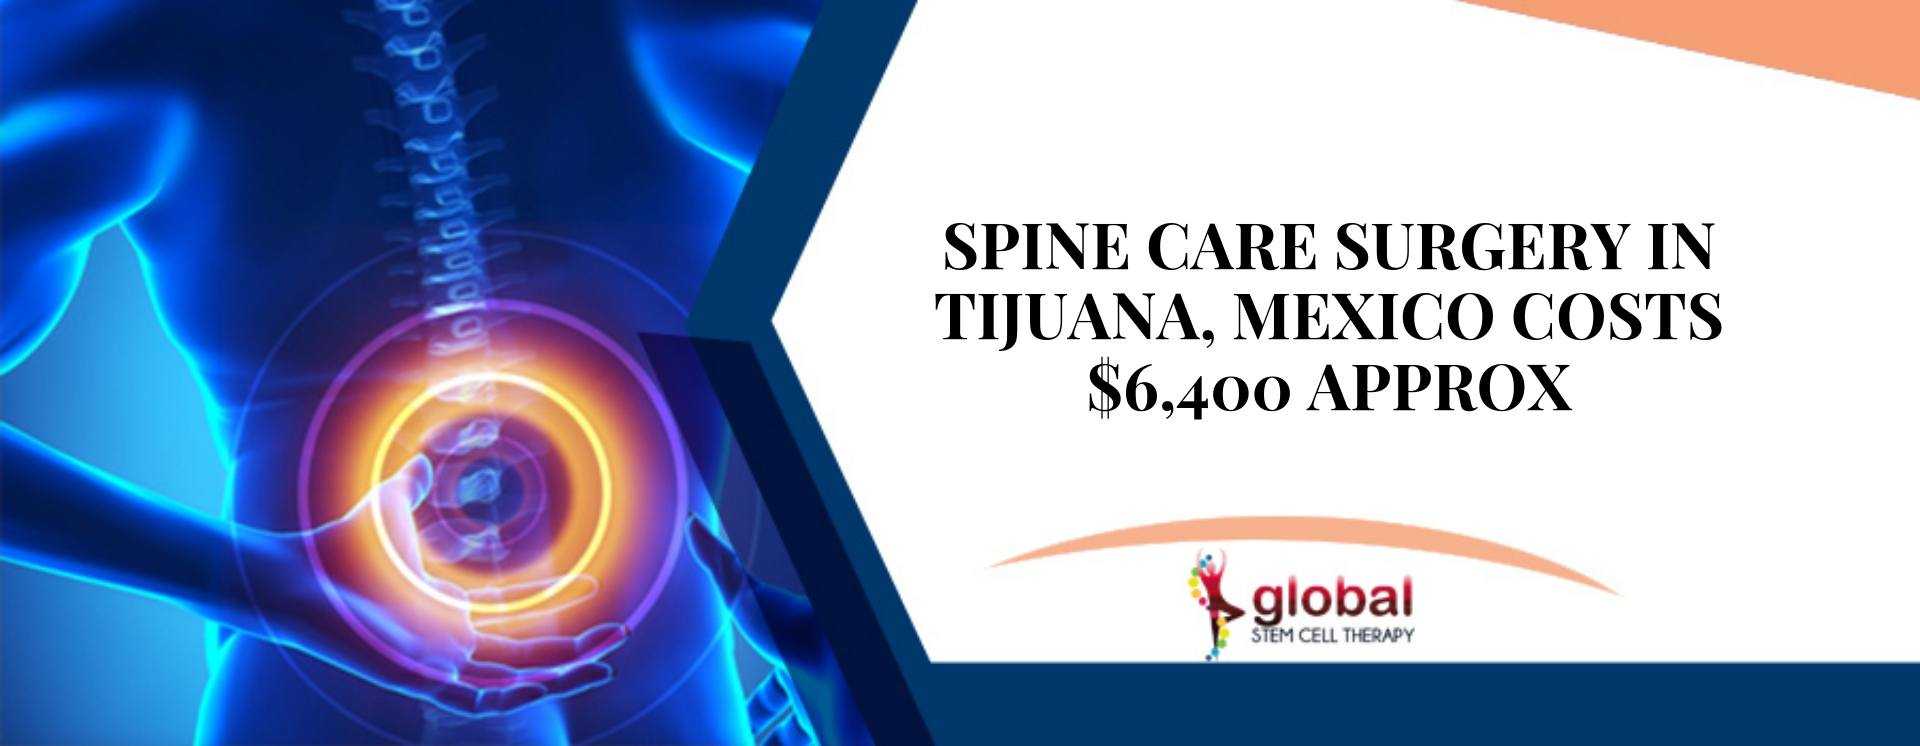 Spine Care_Surgery in Tijuana, Mexico